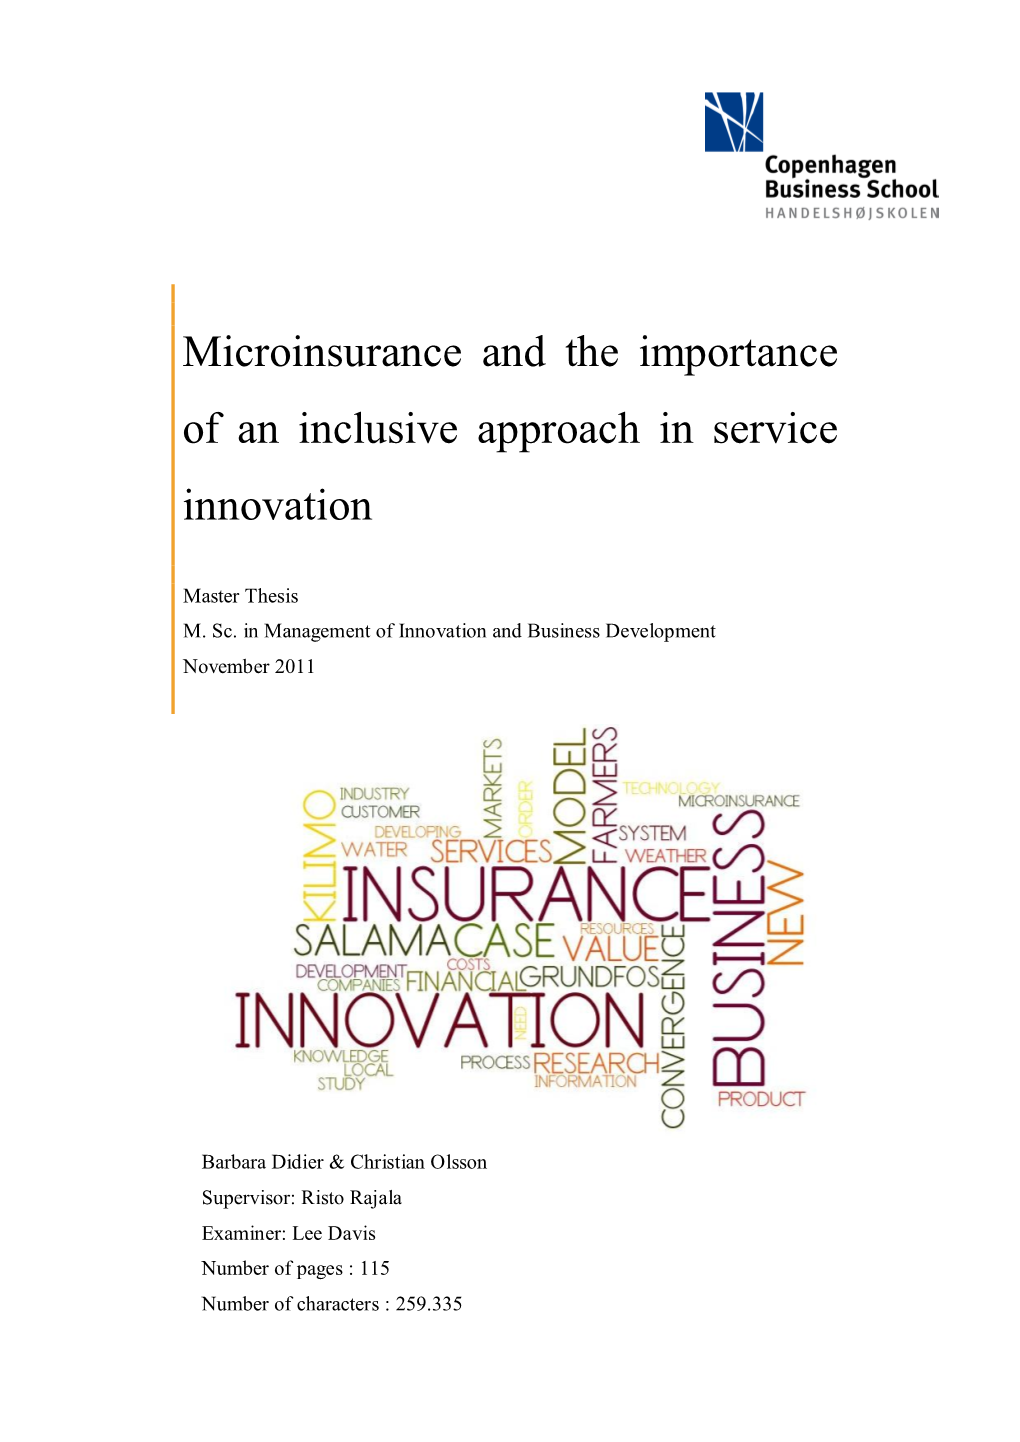 Microinsurance and the Importance of an Inclusive Approach in Service Innovation